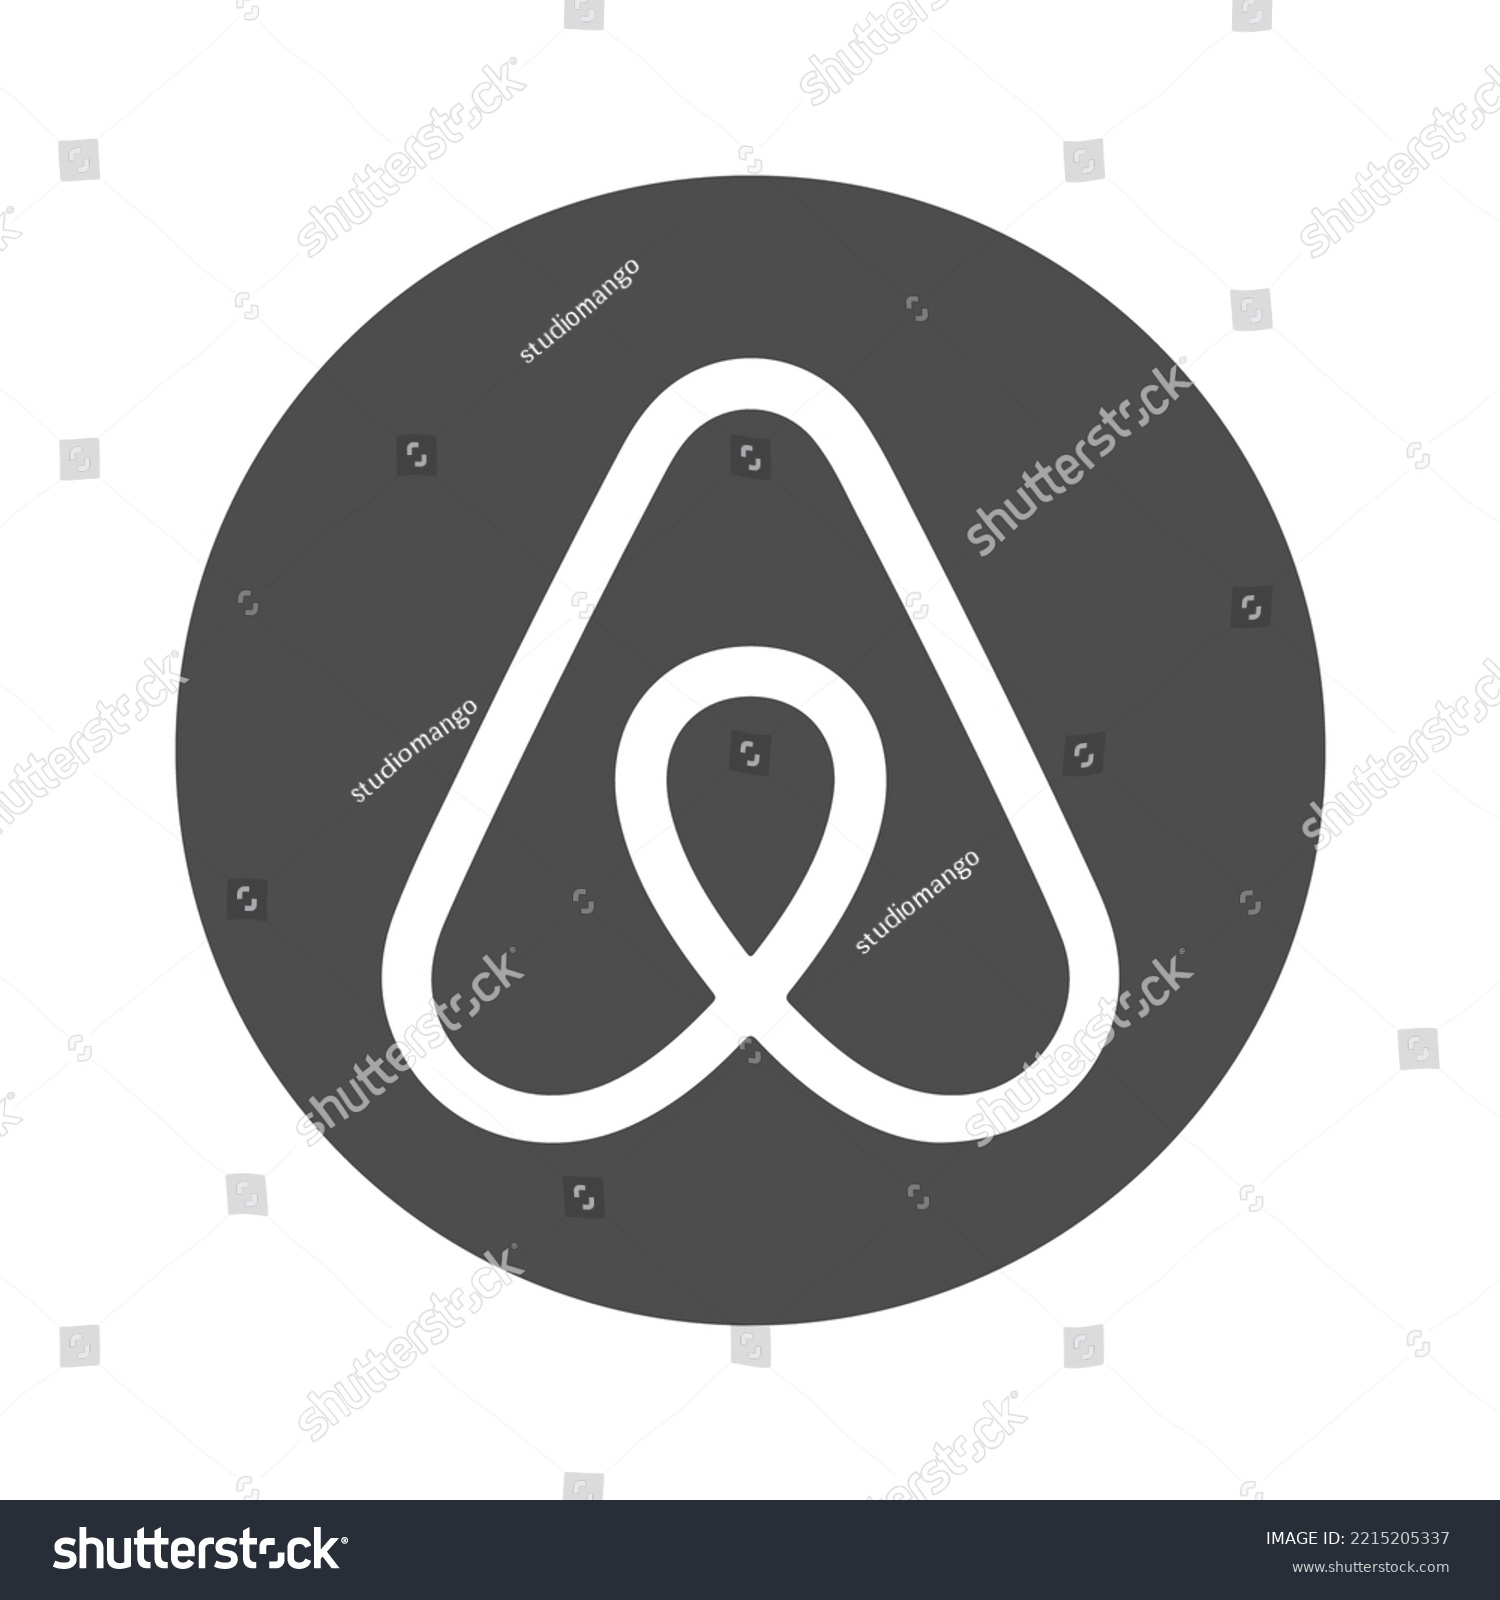 SVG of Airbnb logo symbol icon sign  on a white background. Vector illustration. svg